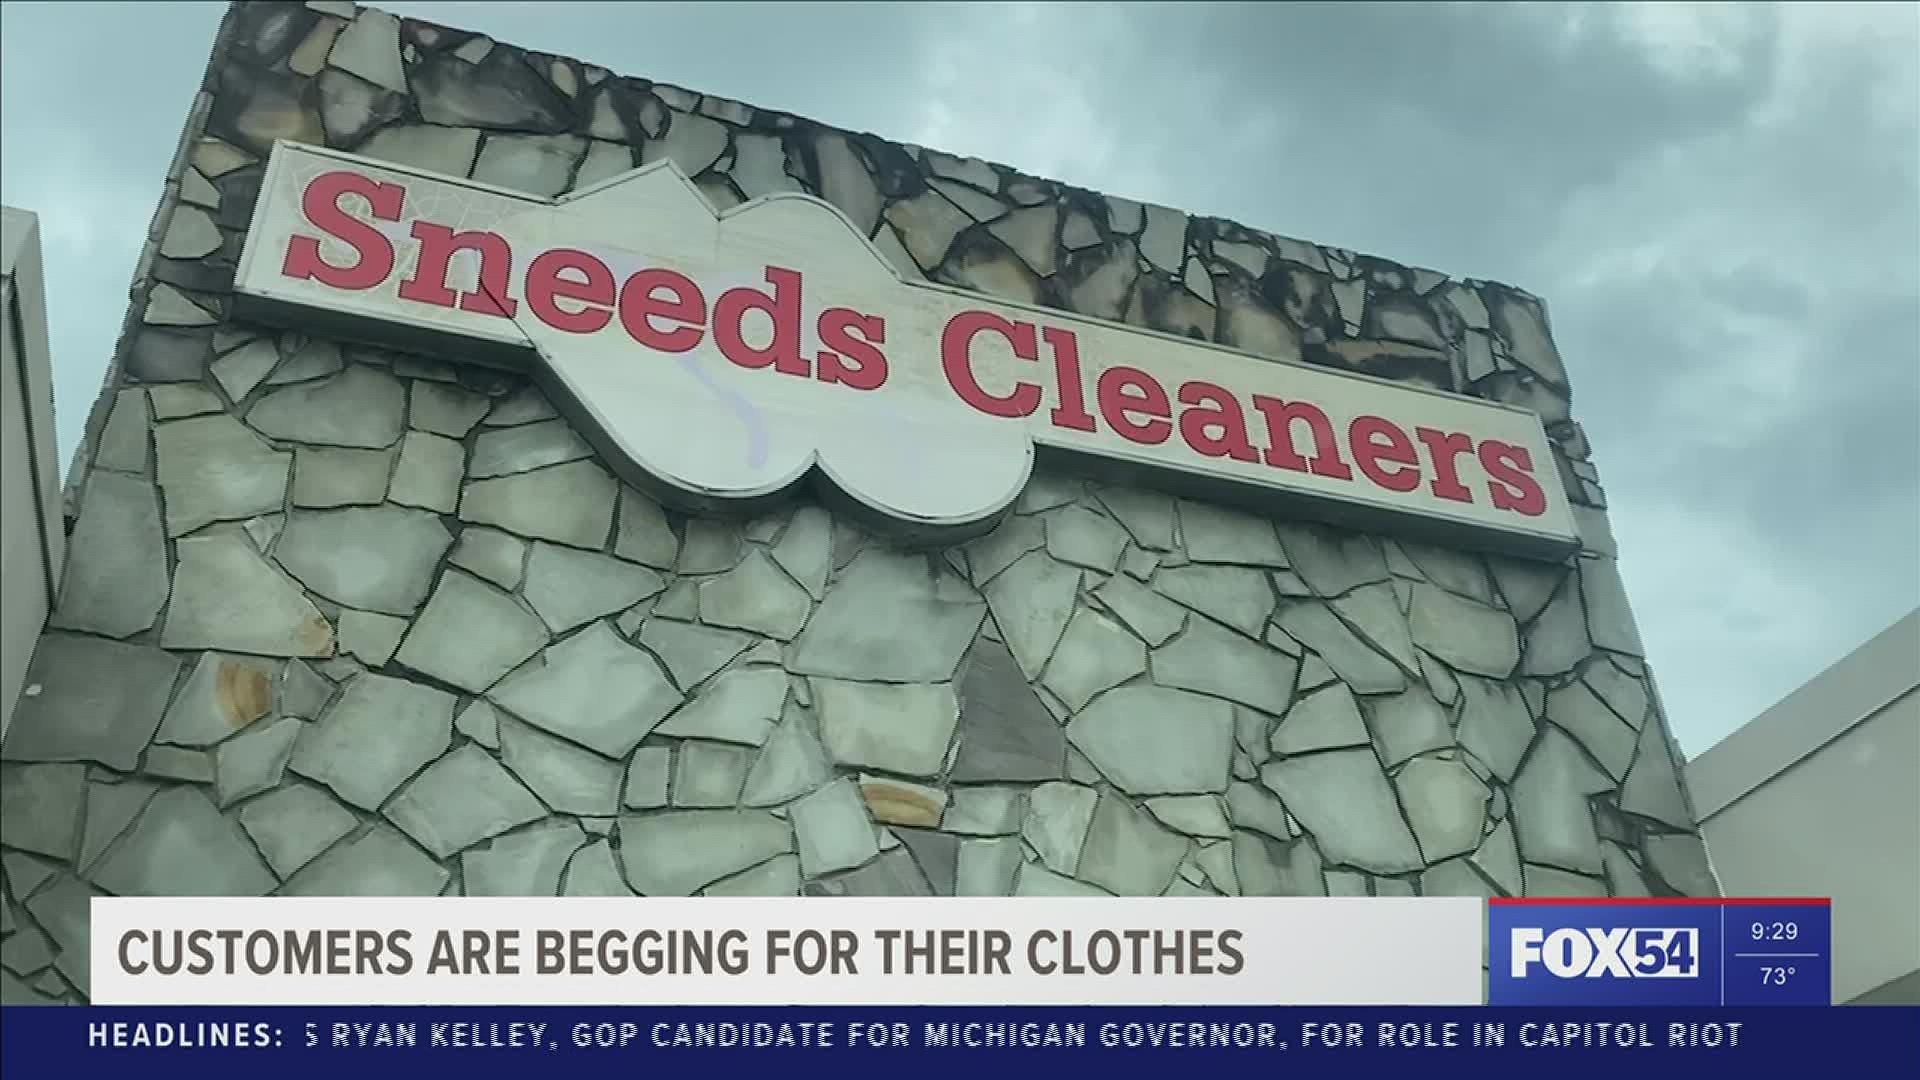 Sneed's Dry Cleaning Company has recently closed; This matters because their doors closed with customers' clothes still inside...